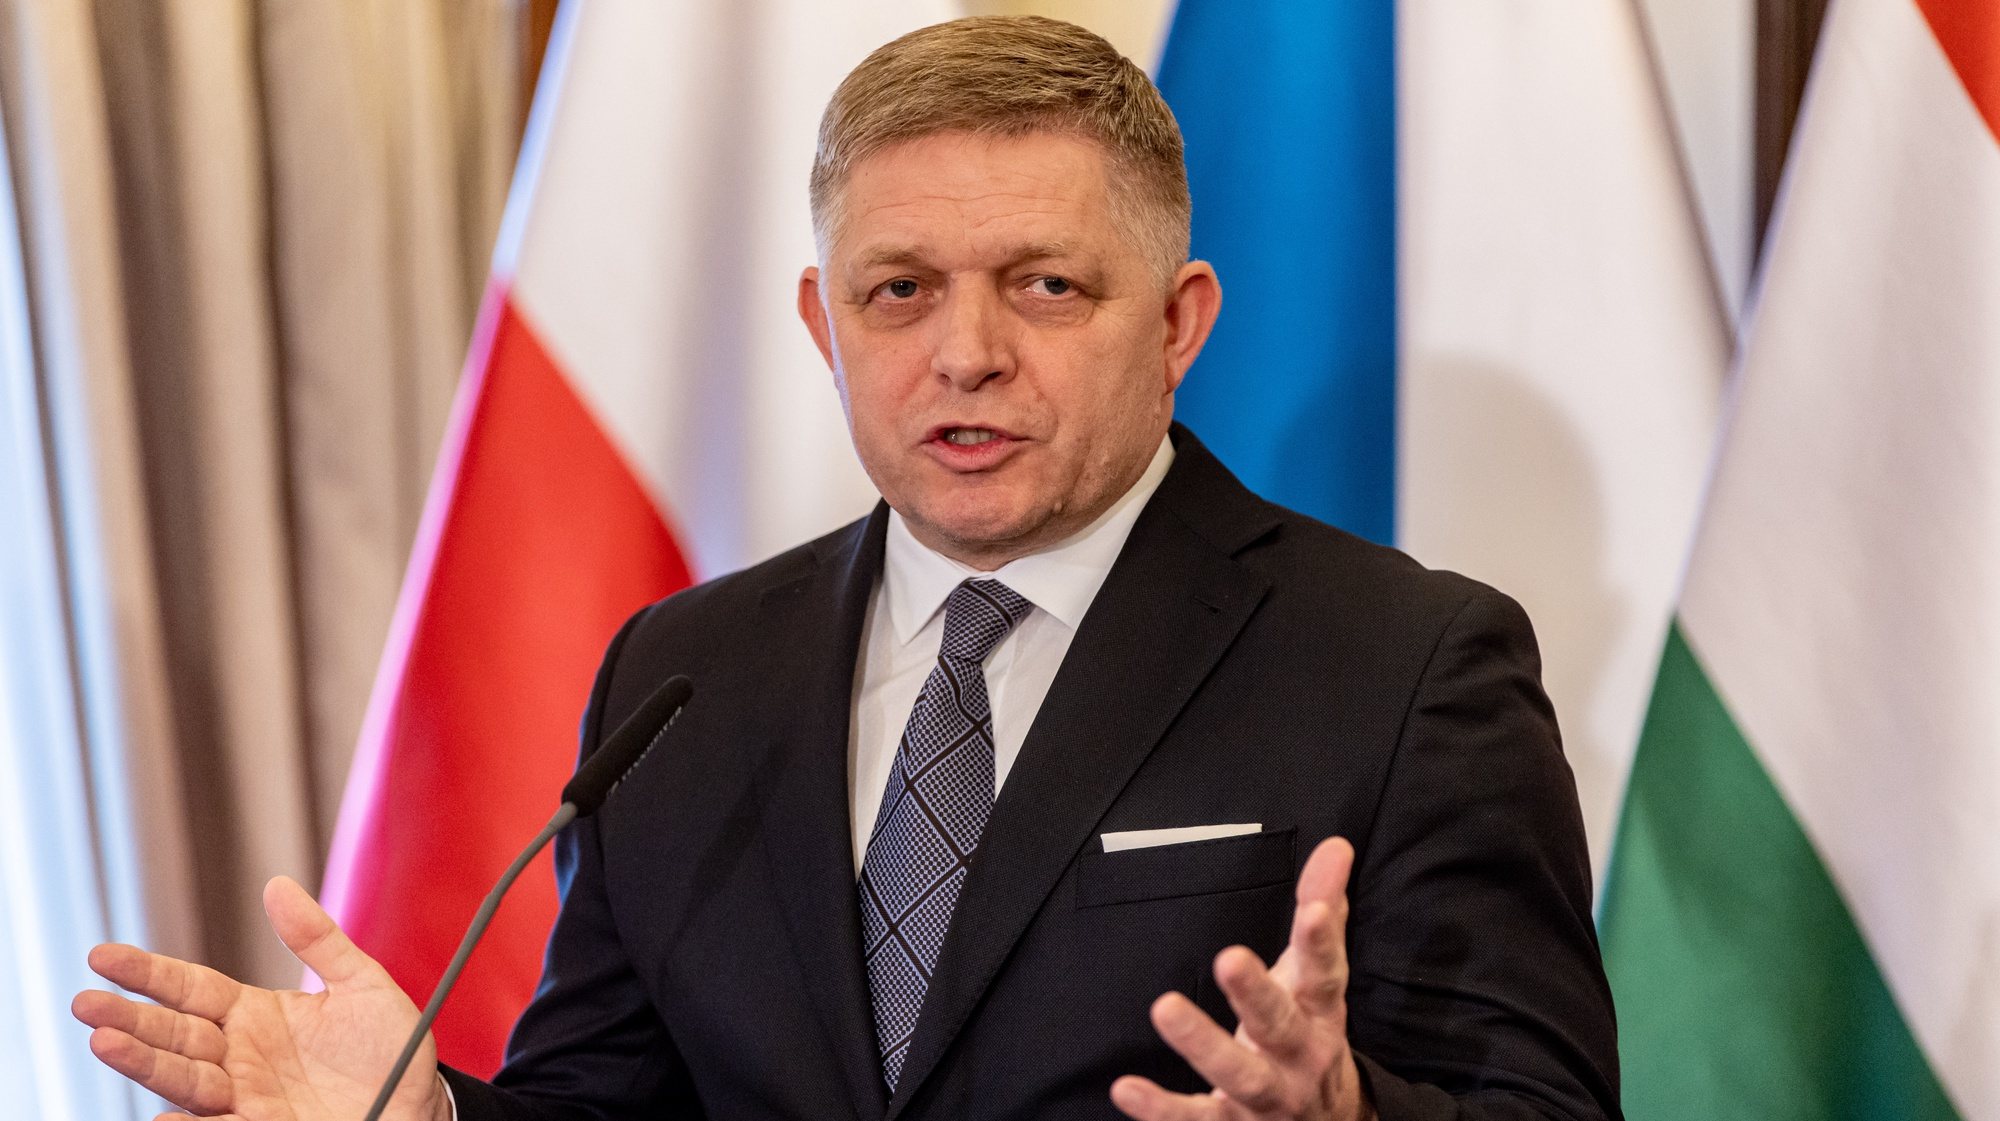 epa11184397 Slovak Prime Minister Robert Fico attends a press conference during the meeting of the Visegrad Group (V4) Prime Ministers in Prague, Czech Republic, 27 February 2023.  EPA/MARTIN DIVISEK